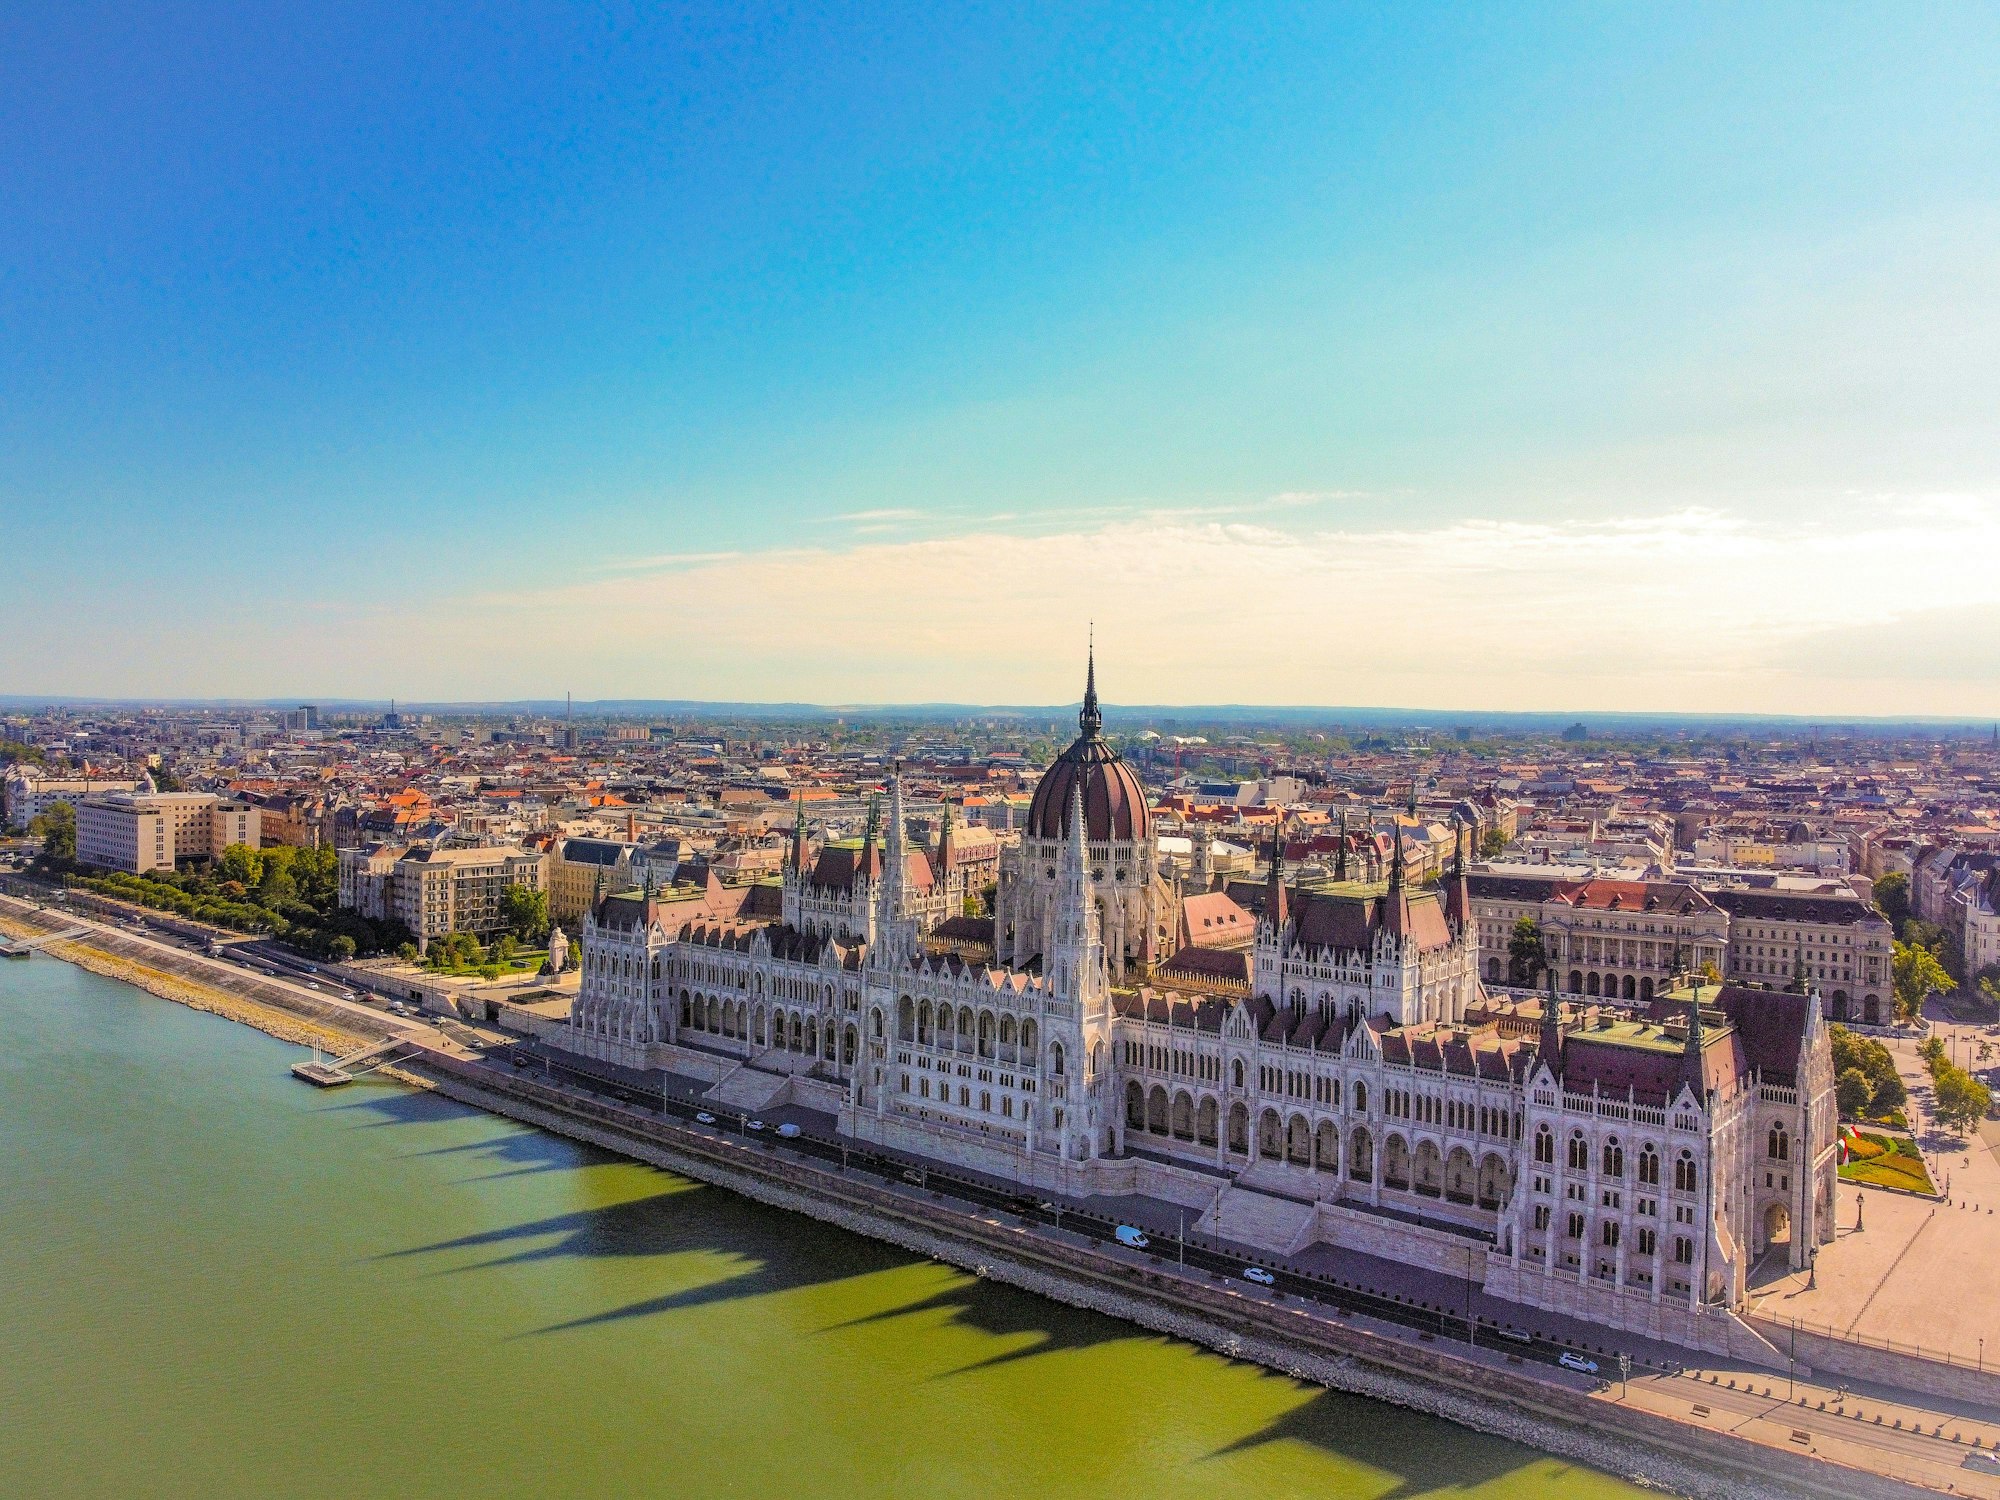 Aerial view of Hungarian Parliament Building reflecting on the river in Hungary